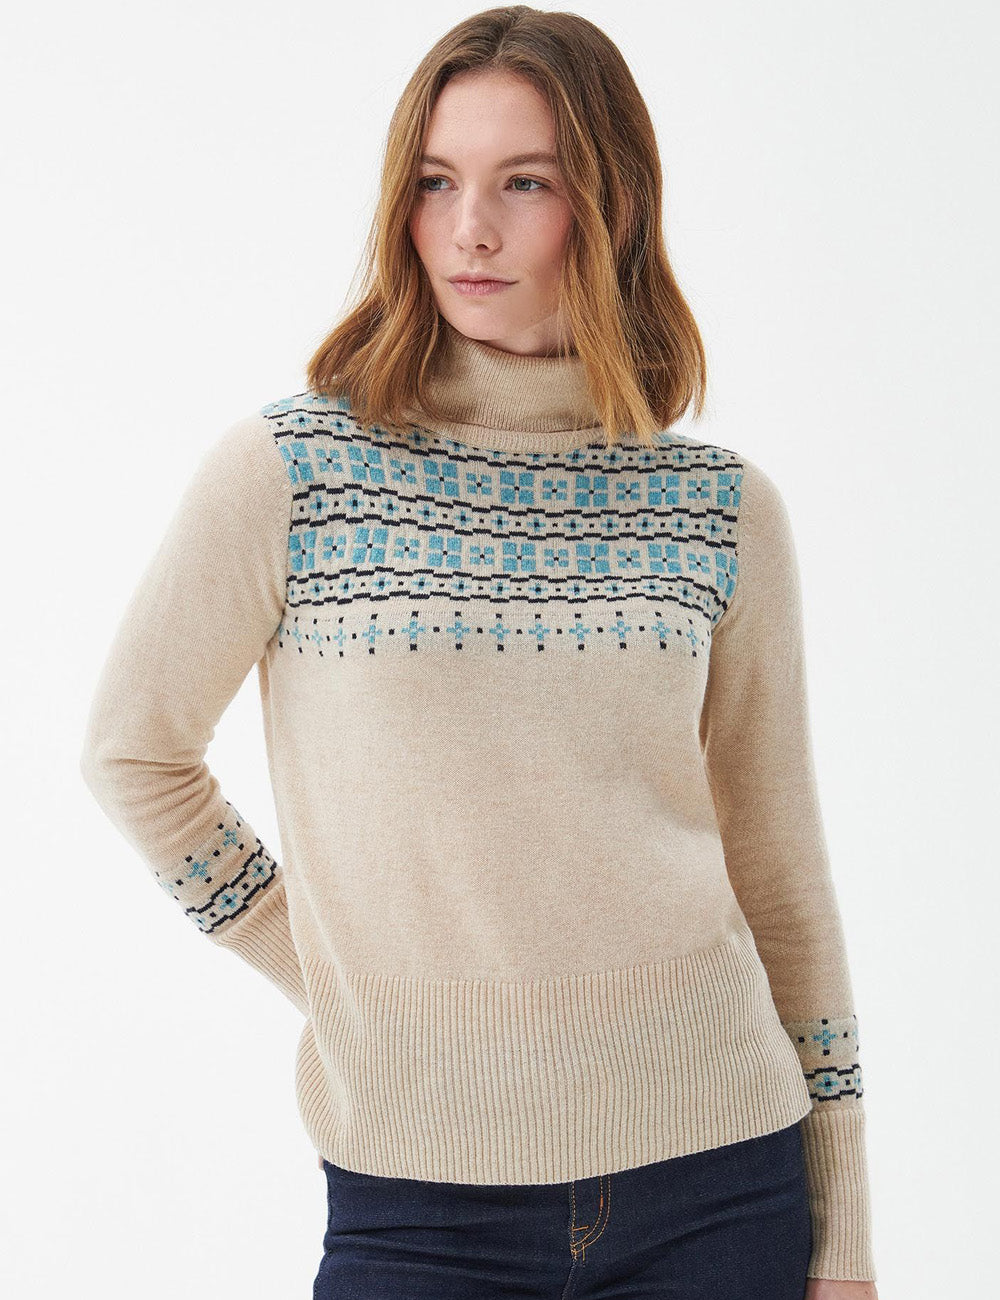 Barbour Herring Knitted Jumper - Oatmeal